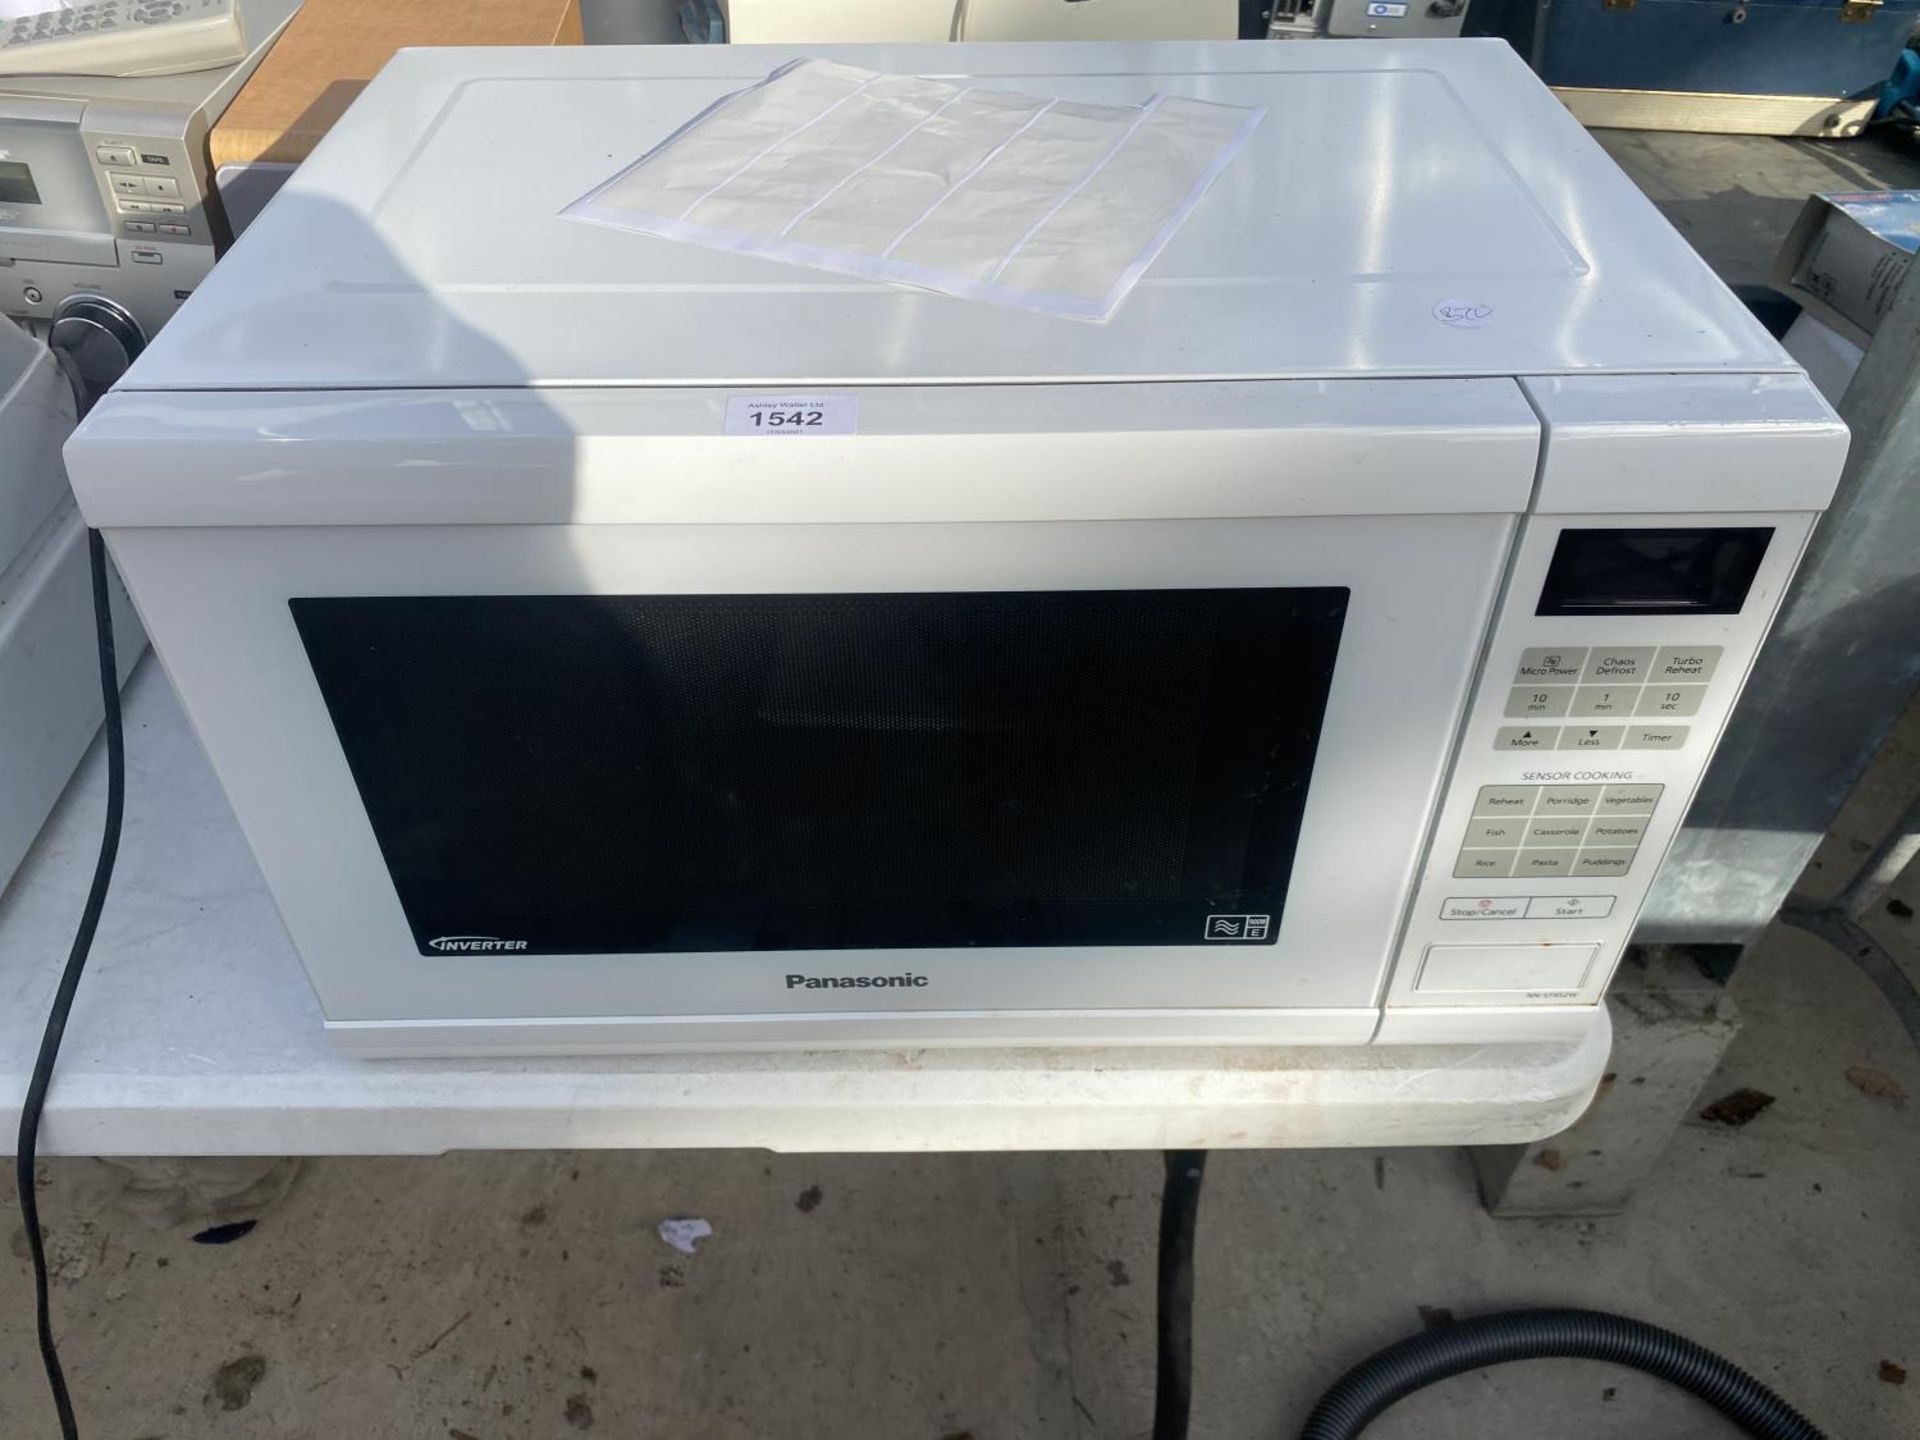 A WHITE PANASONIC MICROWAVE OVEN BELIEVED IN WORKING ORDER BUT NO WARRANTY